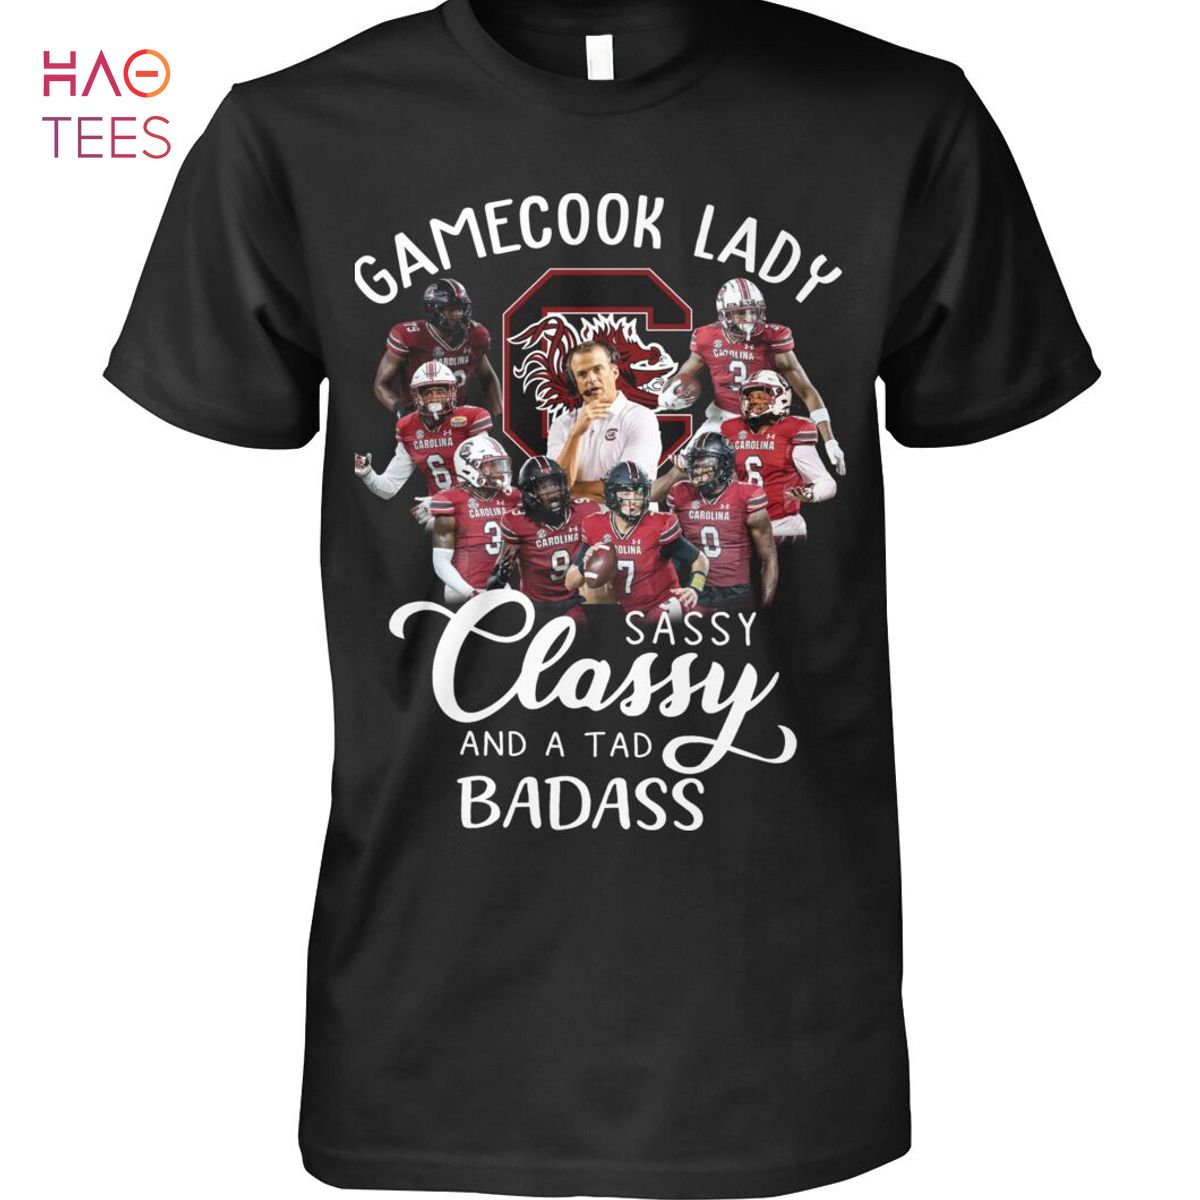 Gamecook Lady Sassy Classy And A Tab Badass Shirt